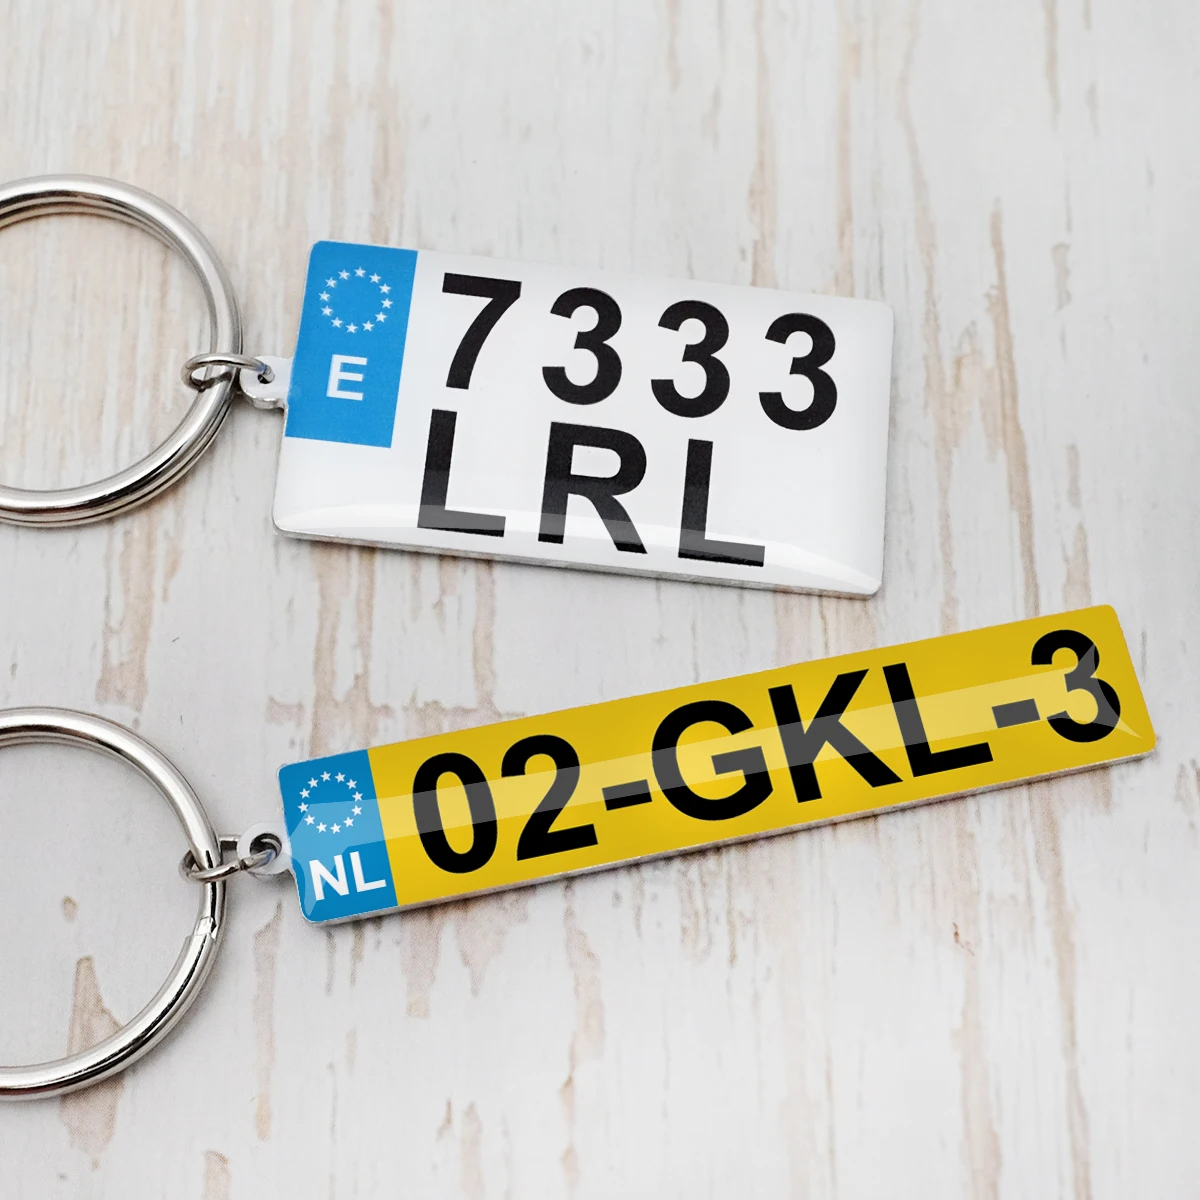 Custom Car Plate Keychain,Personalized Car Number Plate Keyring,Number Plate Photo Keychain,Gift For Him,New Drivers Gift